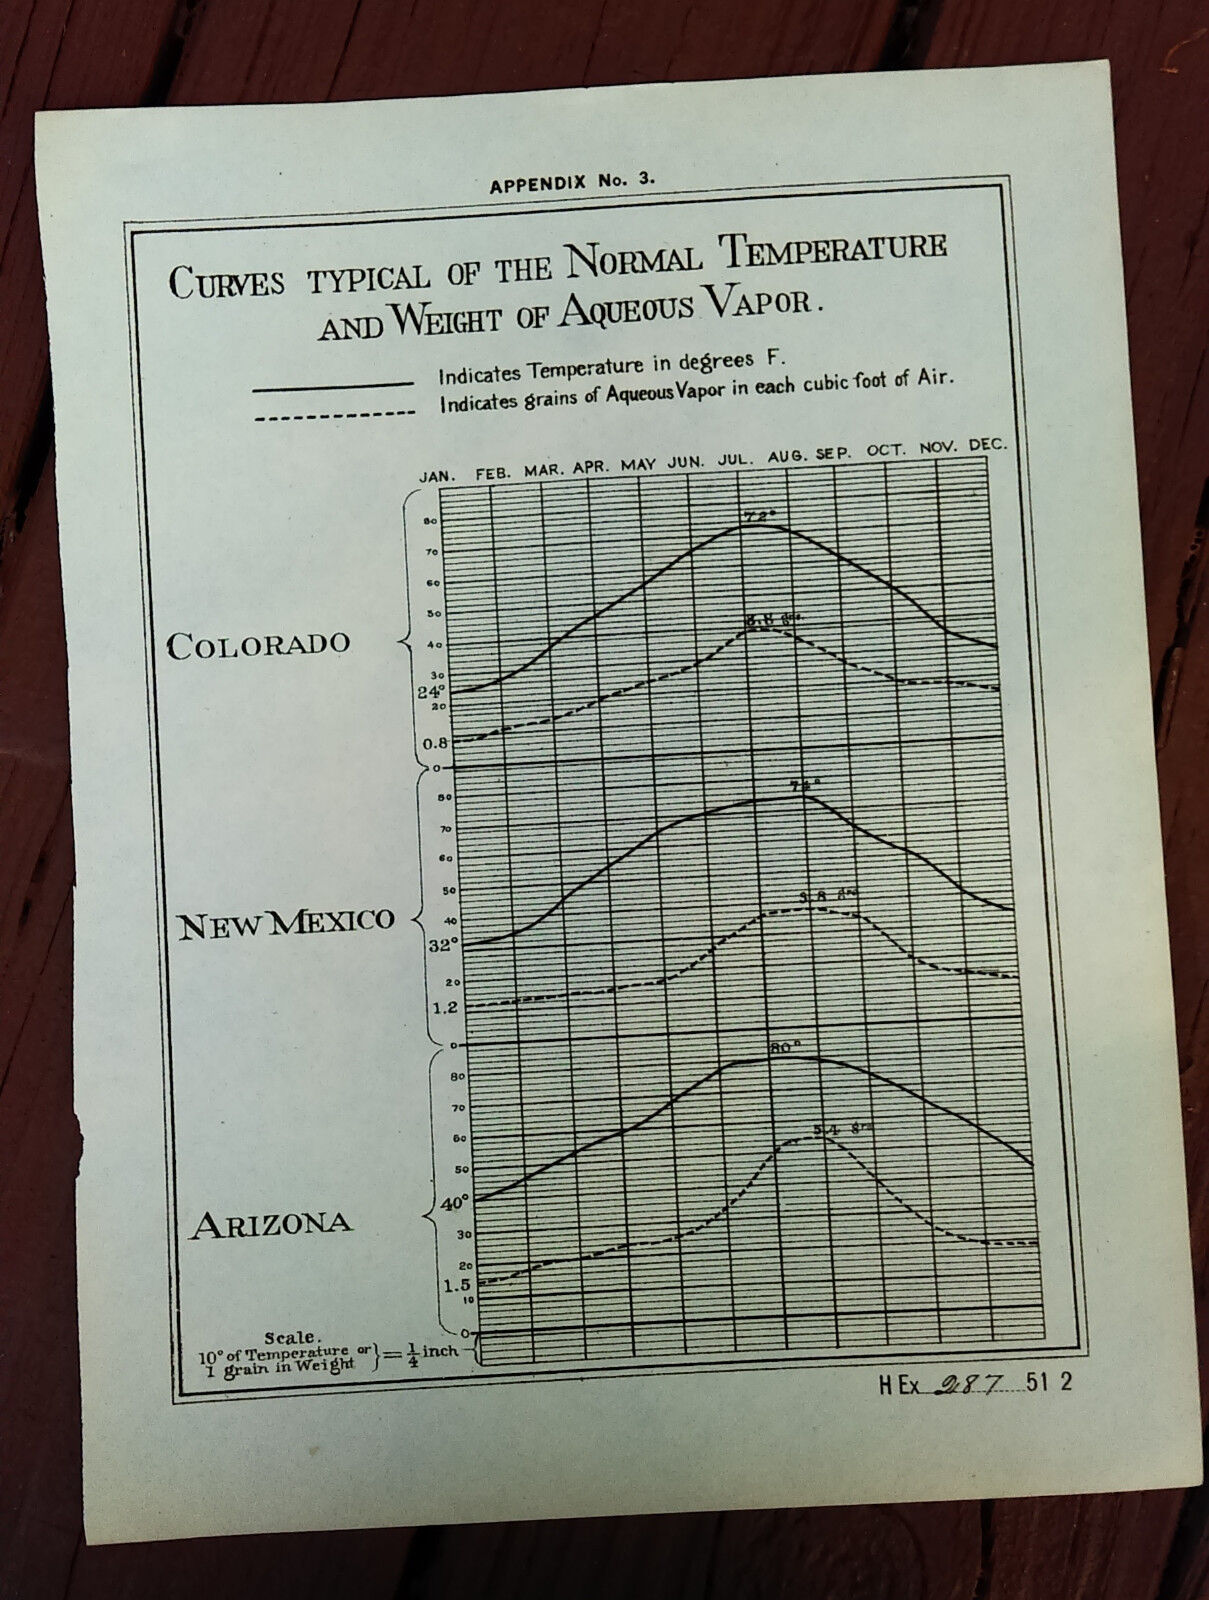 1891 Chart of Curves Typical of the Normal Temperatures in CO NM and AZ